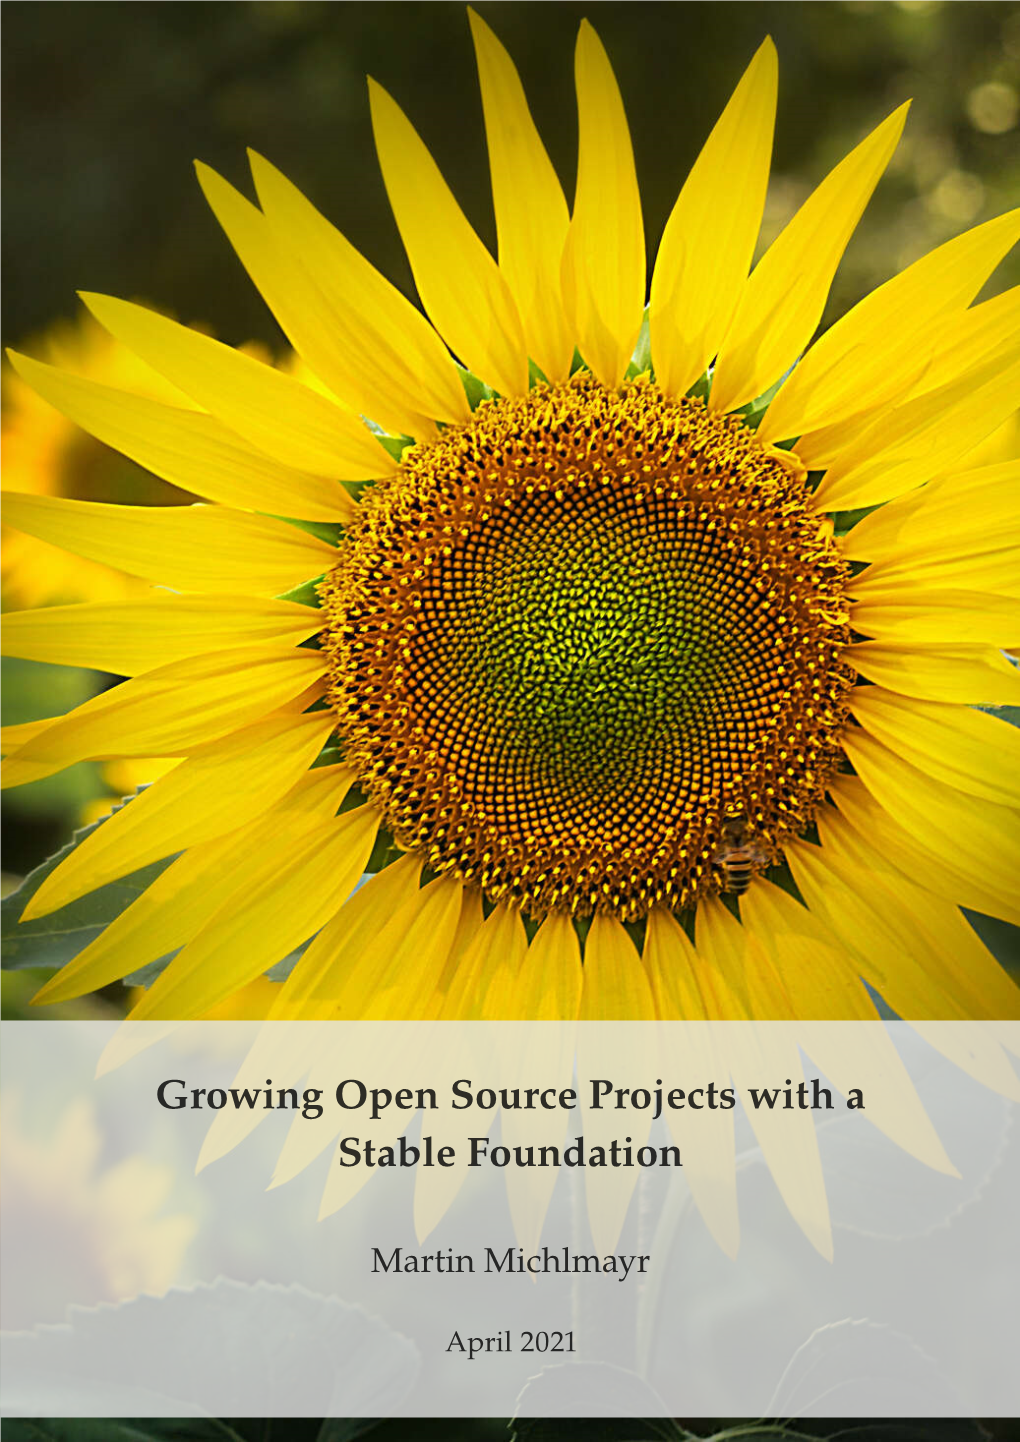 Growing Open Source Projects with a Stable Foundation